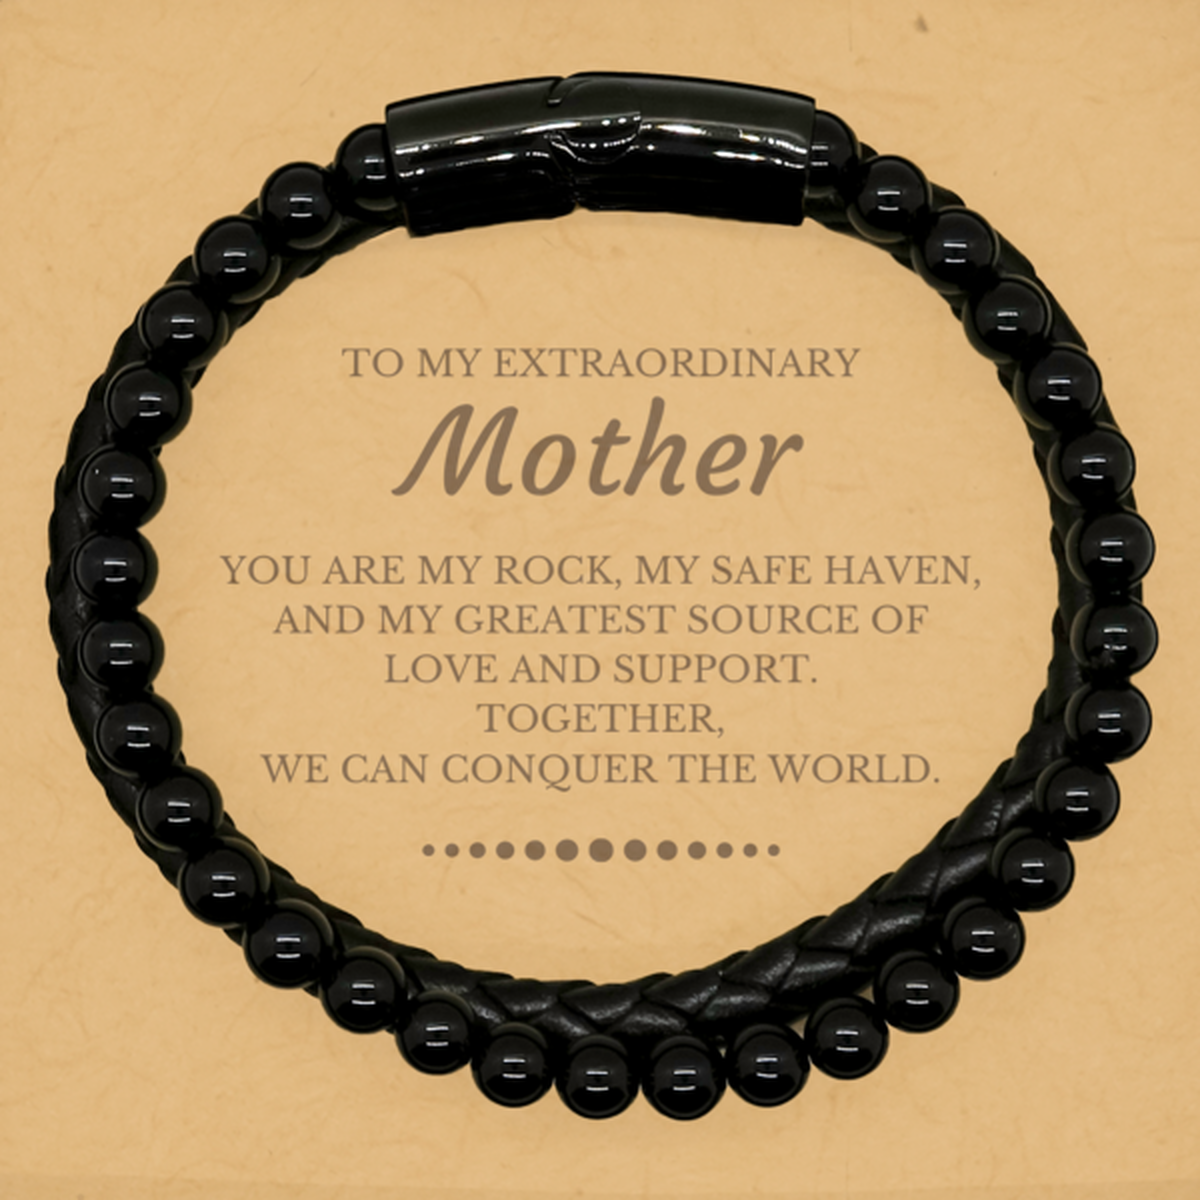 To My Extraordinary Mother Gifts, Together, we can conquer the world, Birthday Stone Leather Bracelets For Mother, Christmas Gifts For Mother